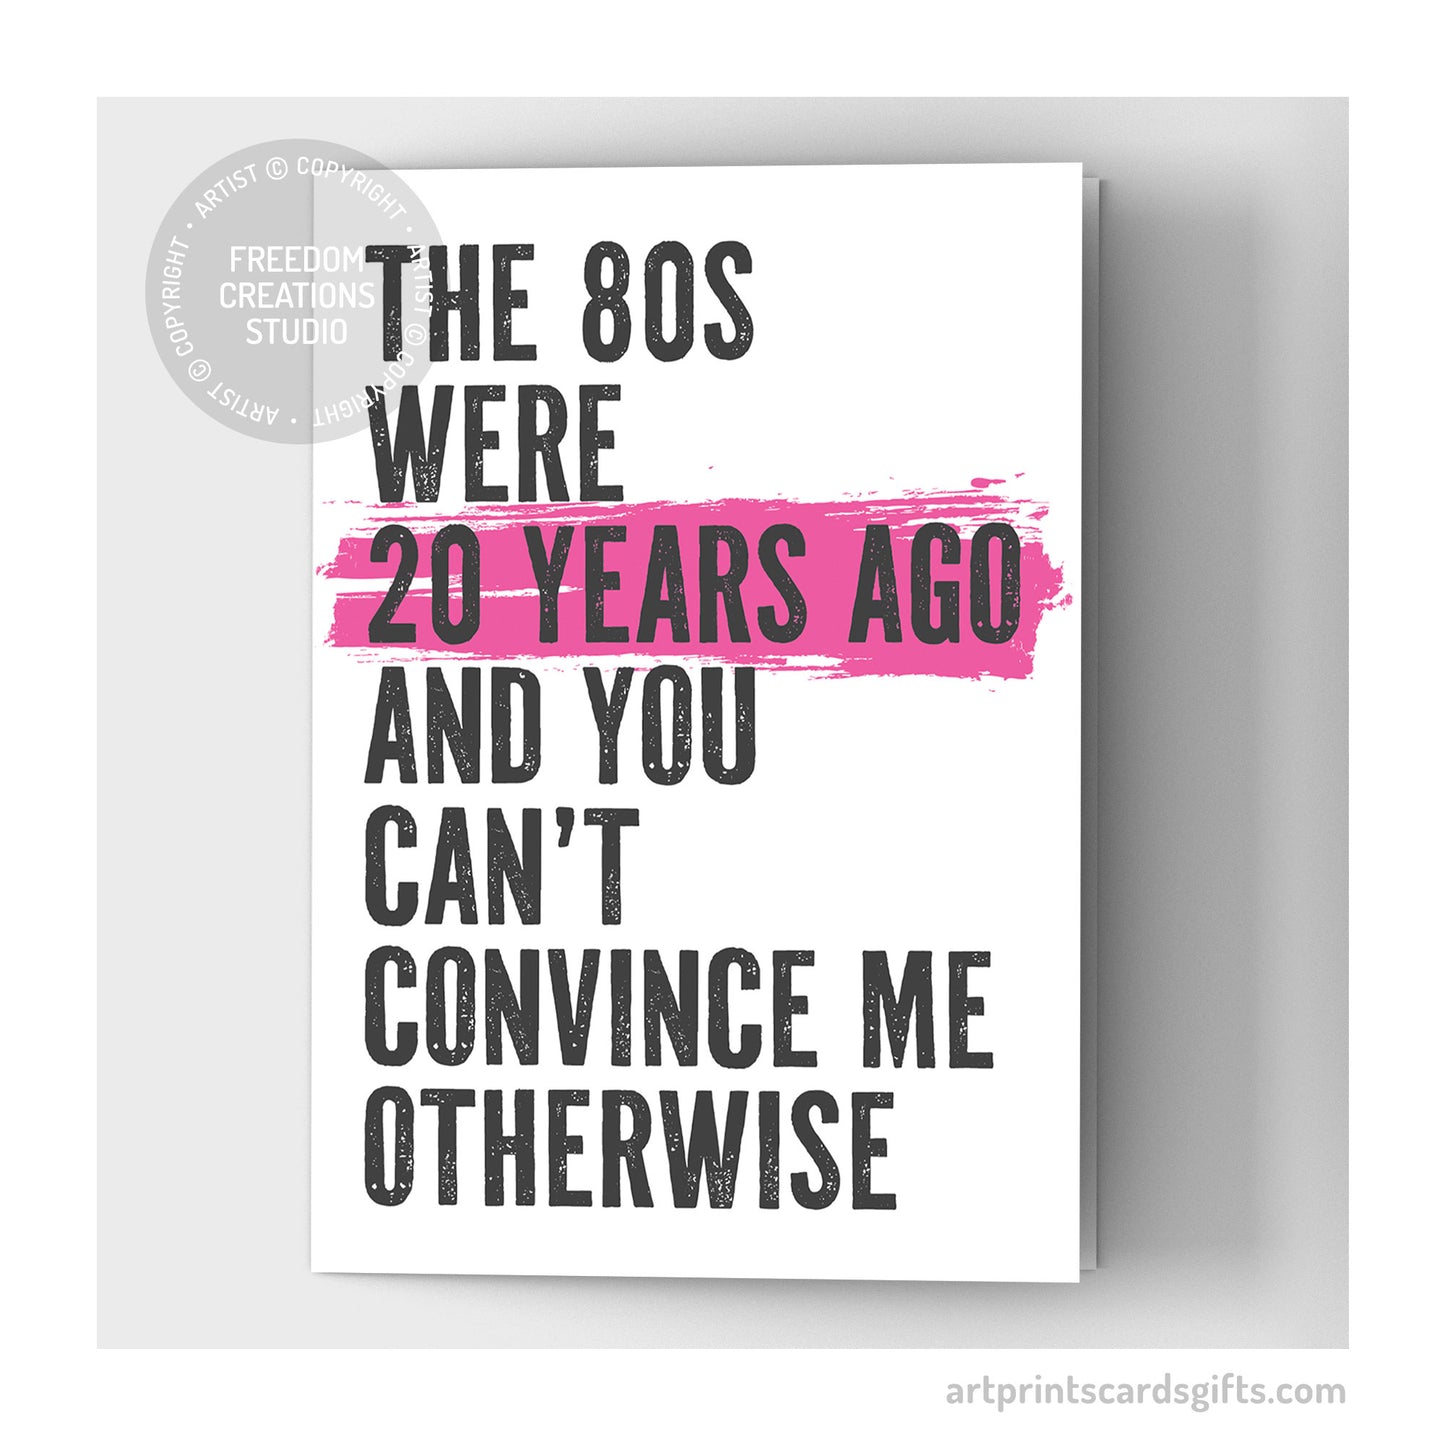 The 80s were 20 years ago